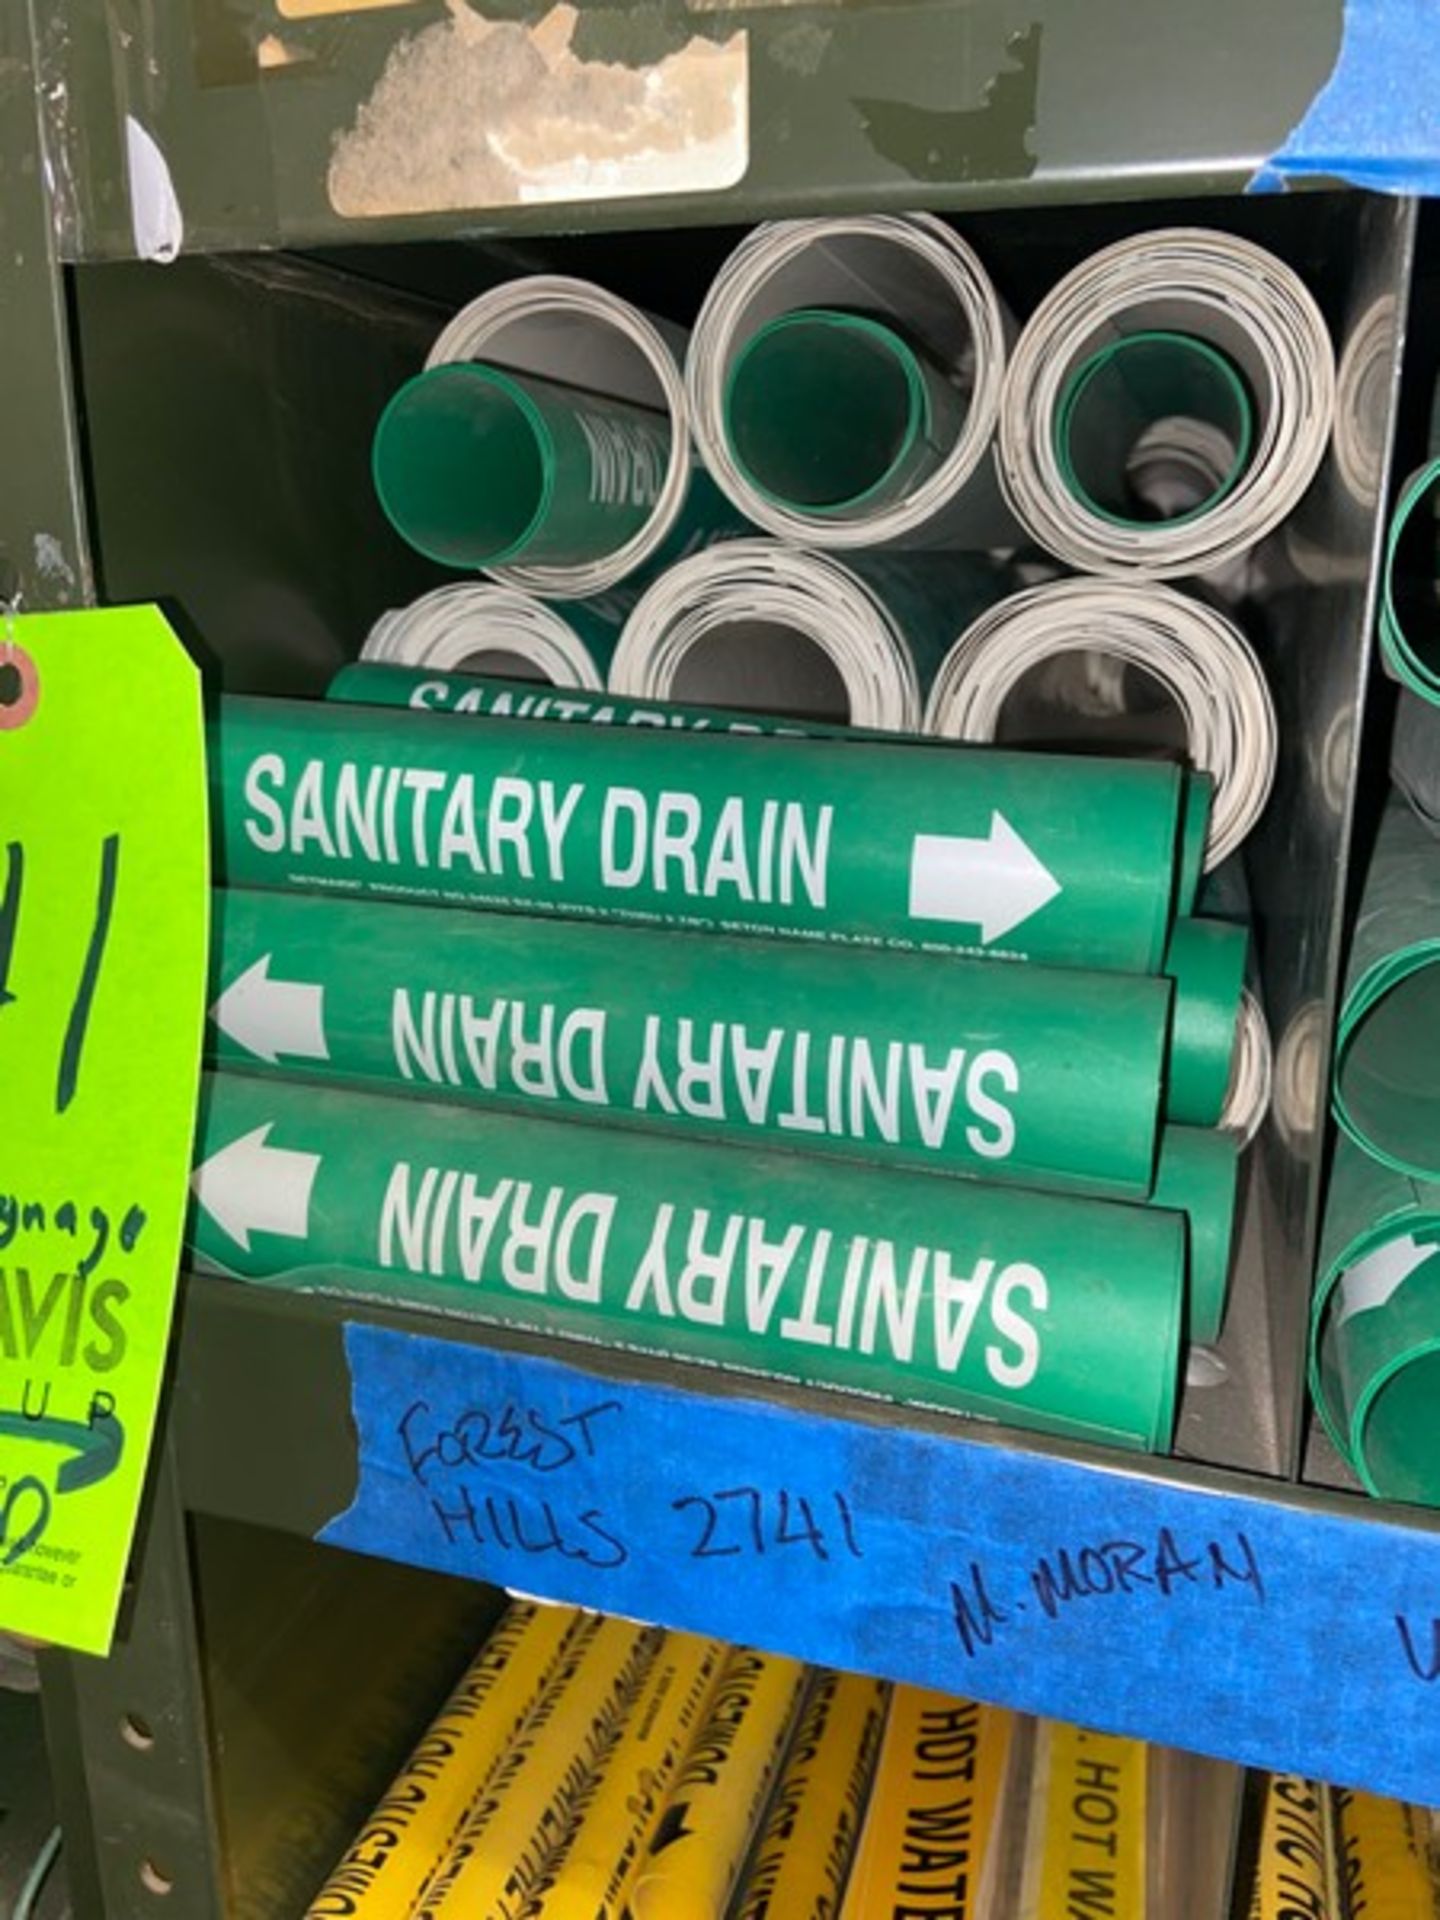 Lot of Assorted Pipe Signage, Includes Green & Yellow Signage, Labels Include Sanitary Drain, - Image 3 of 10